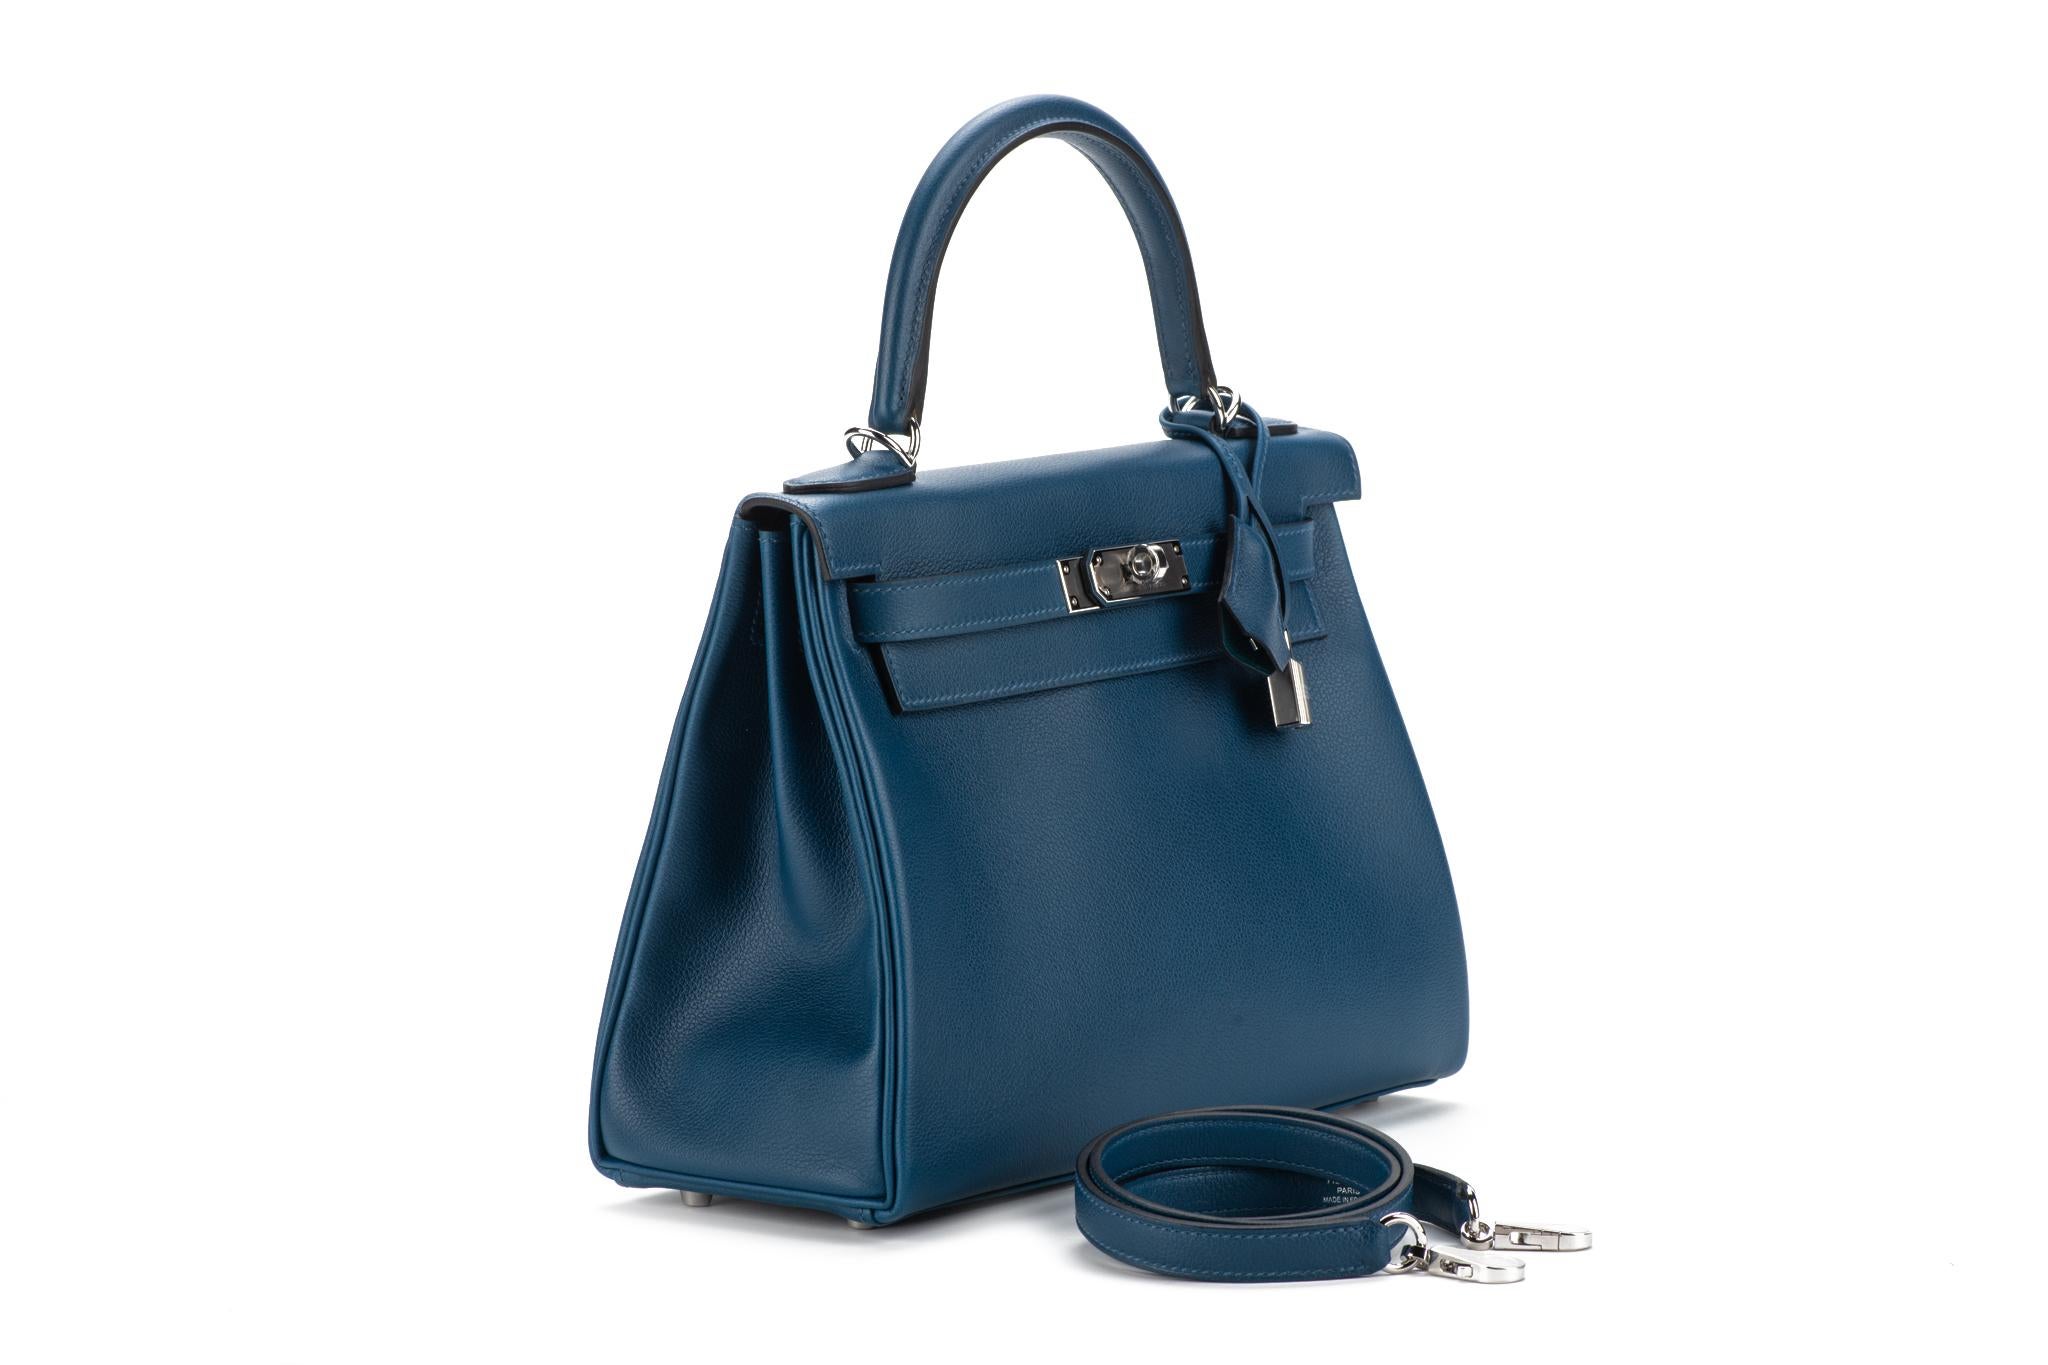 Hermes brand new in box kelly 28 retourne verso limited edition deep blue evercolor, vert bosphore goast skin interior with palladium hardware. Date stamp D for 2019. Comes with clochette, tirette, lock, keys, strap, dust cover, rain jacket, box,